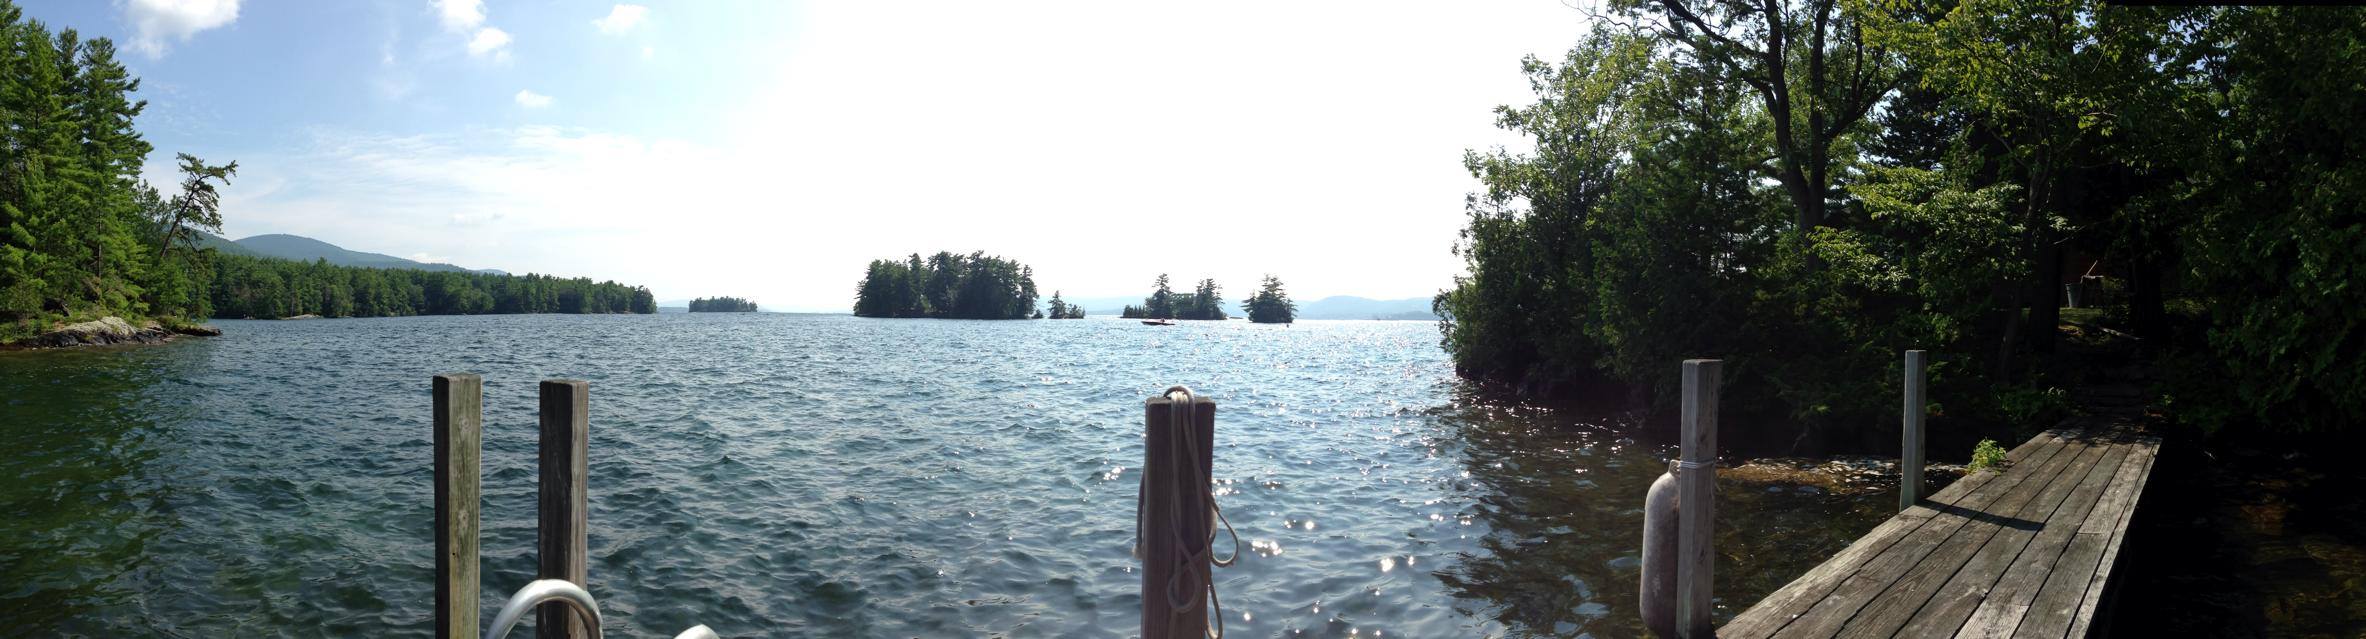 lake george from the little dock_w.sherman.8.14